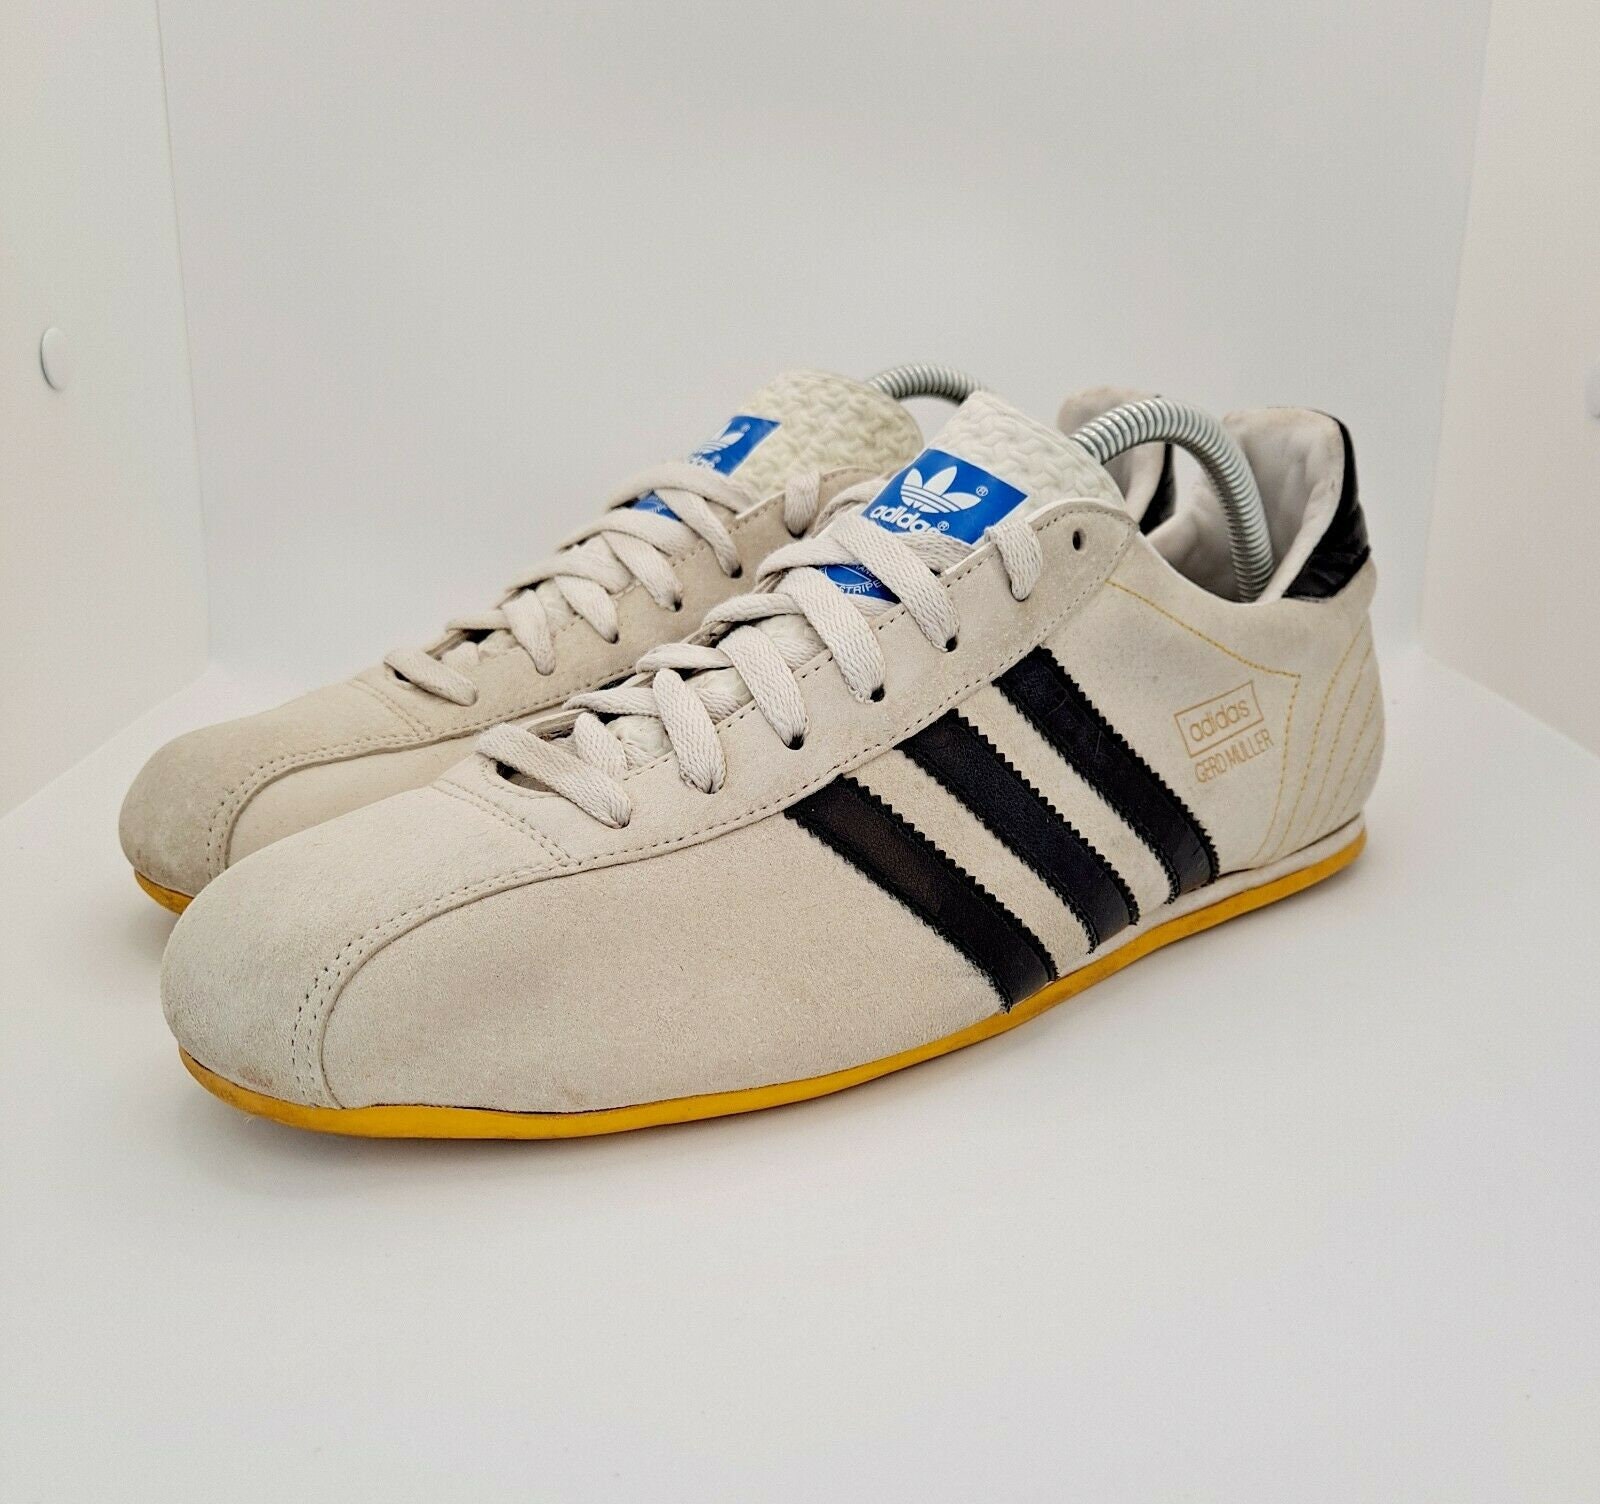 2005 Black Gold Adidas Gerd Muller Trainers Sneakers - Etsy